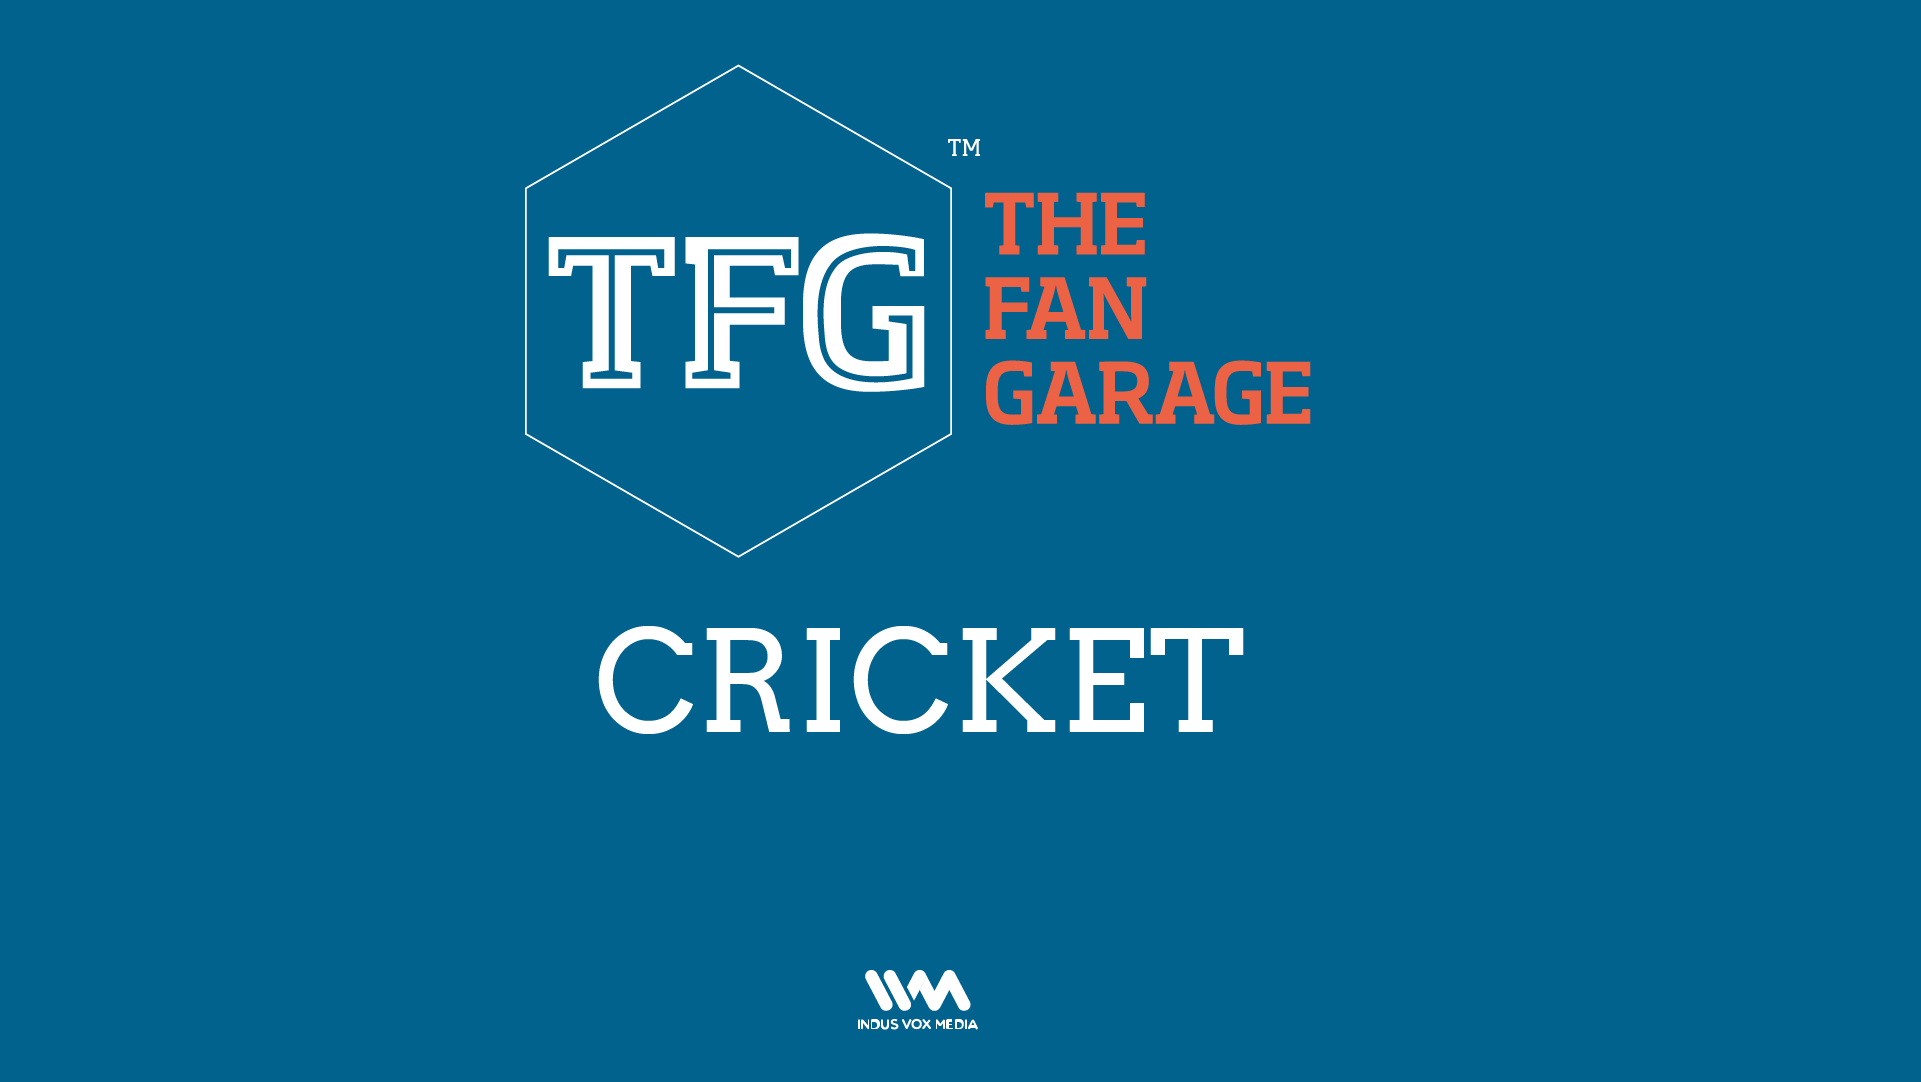 TFG Cricket Ep. 009: It was just another day at work for Virat in Pune